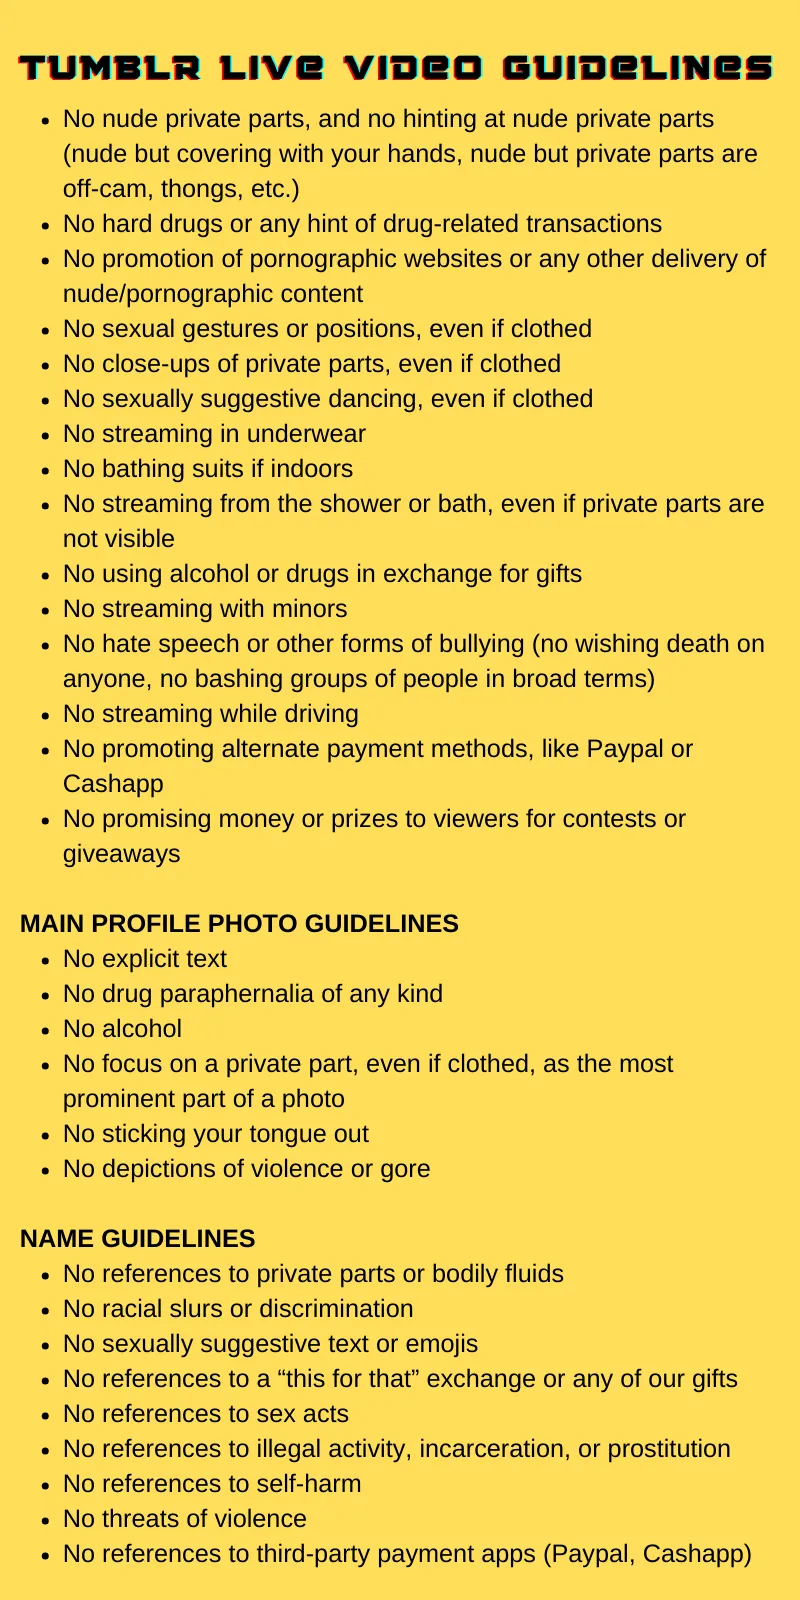 Tumblr Live Streaming Guidelines. The guidelines include Content Guidelines, Main Profile Guidelines, and Name Guidelines.